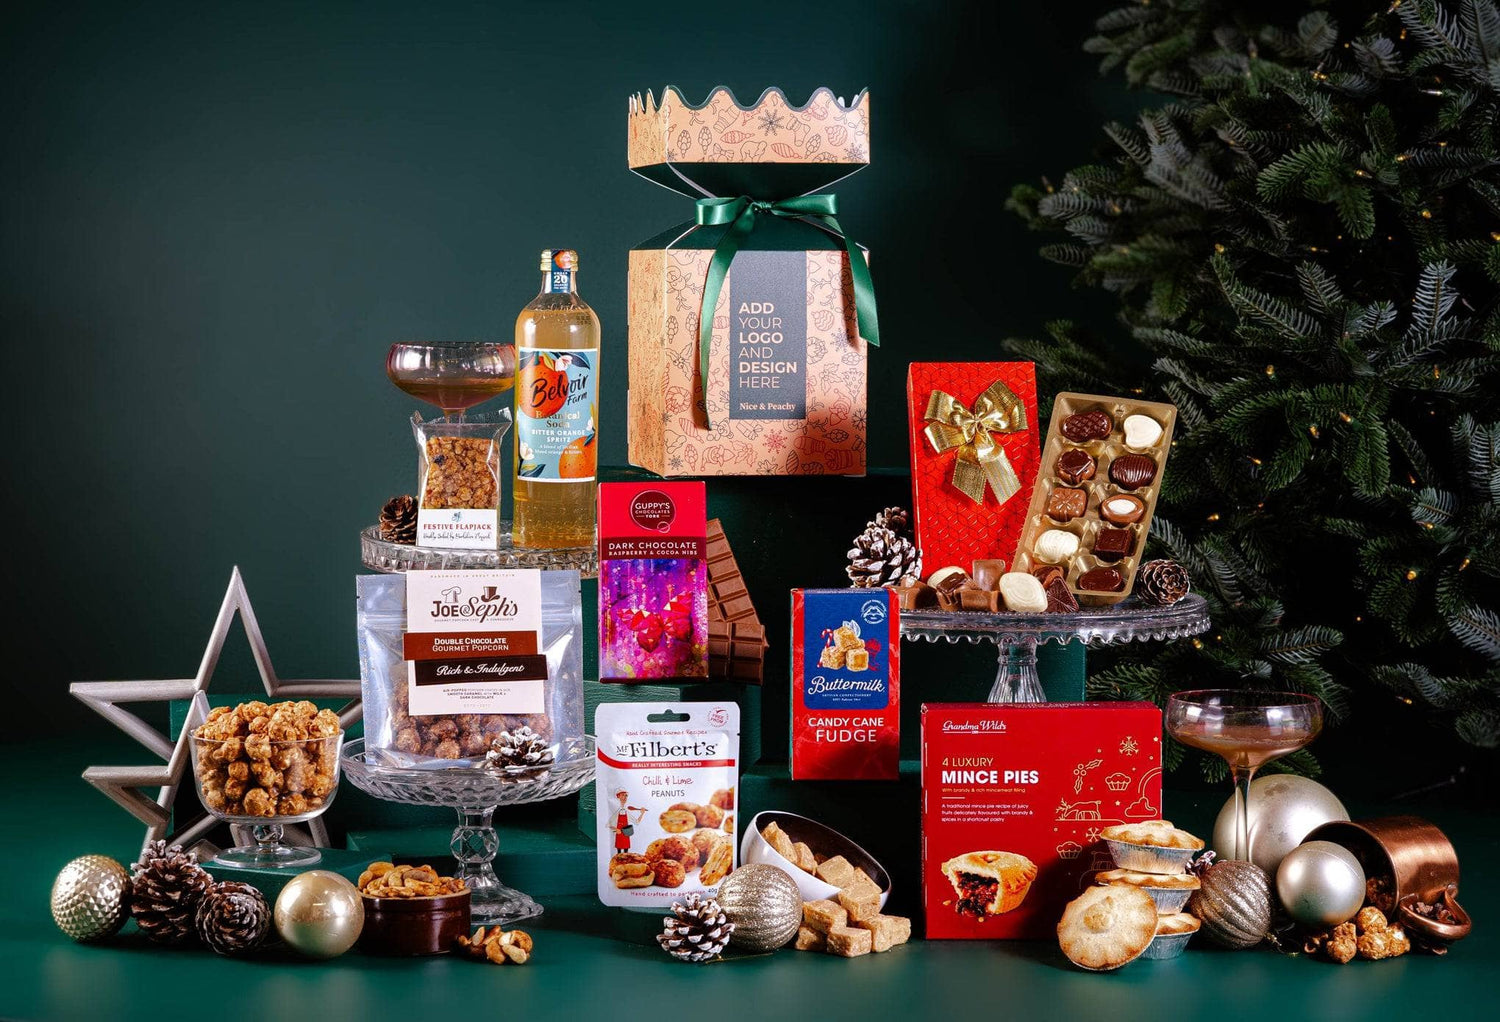 Peach Hampers Corporate Hampers Alcohol-Free The Nut Cracker Christmas Hamper